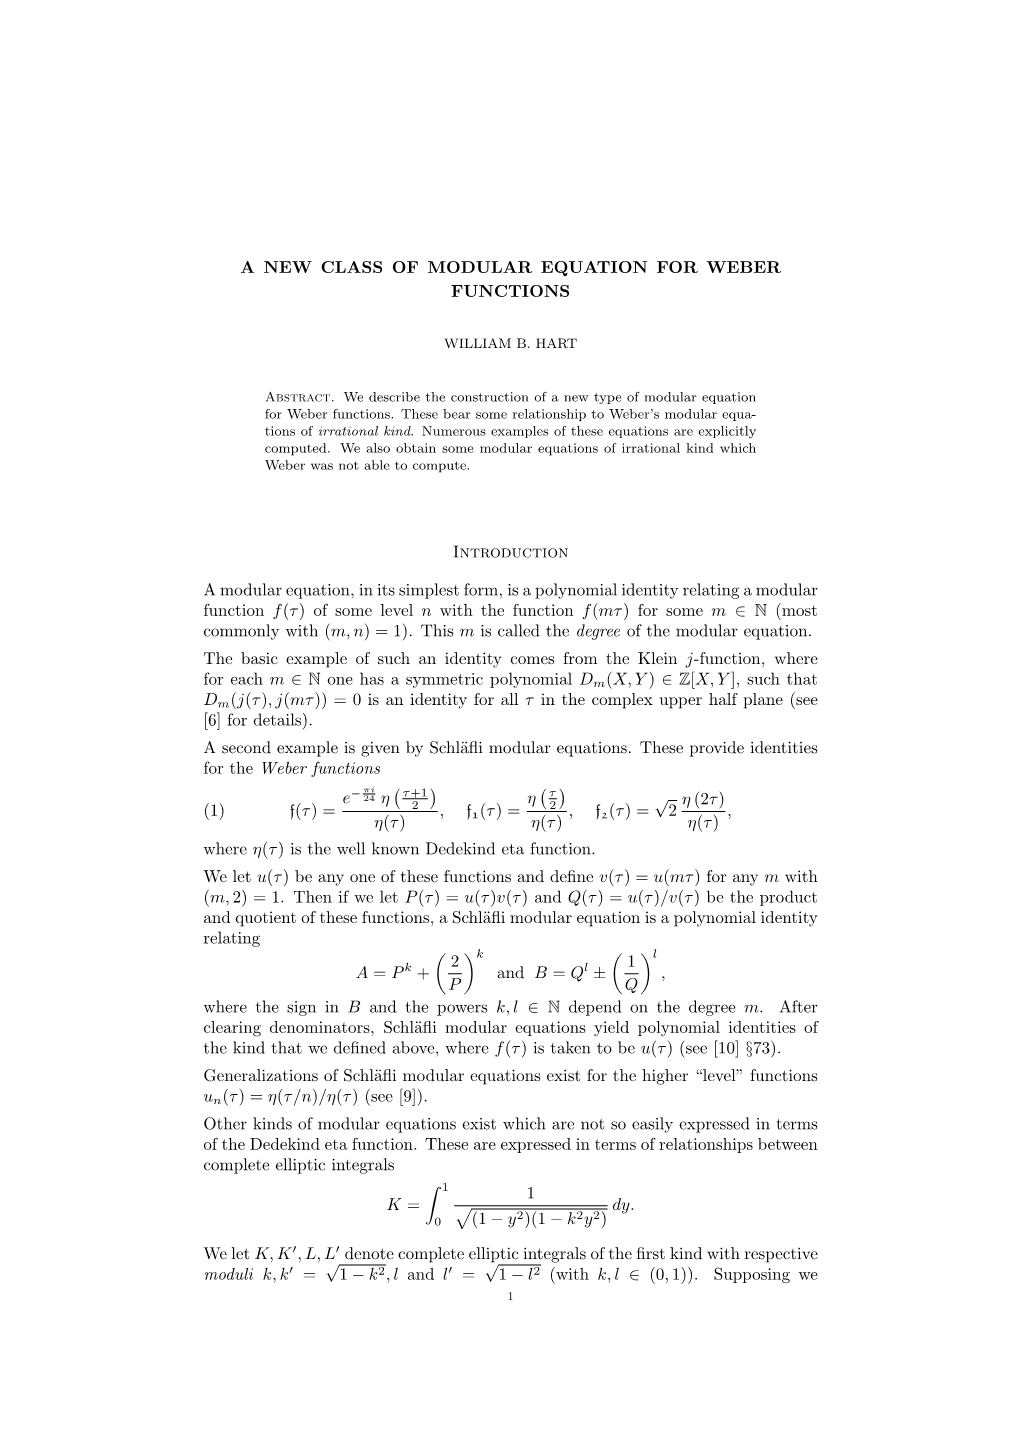 A New Class of Modular Equation for Weber Functions